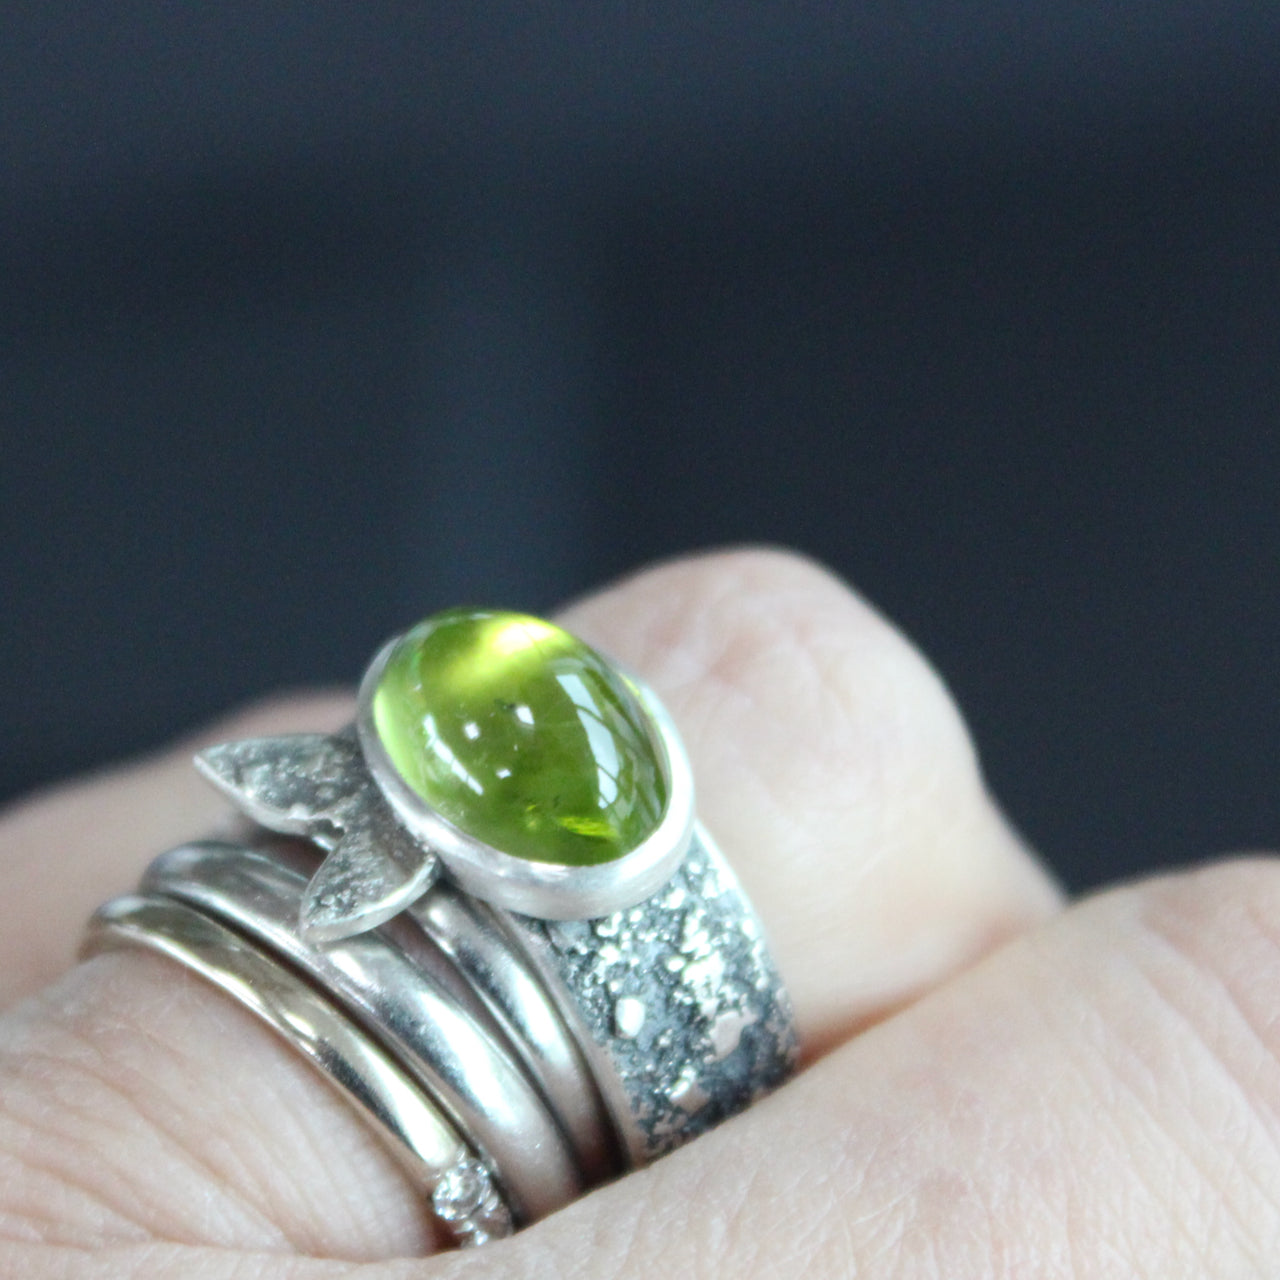 Carin Lindberg - Peridot ring in textured sterling silver with textured leaf detail shown being worn on a left hand with other dress rings.